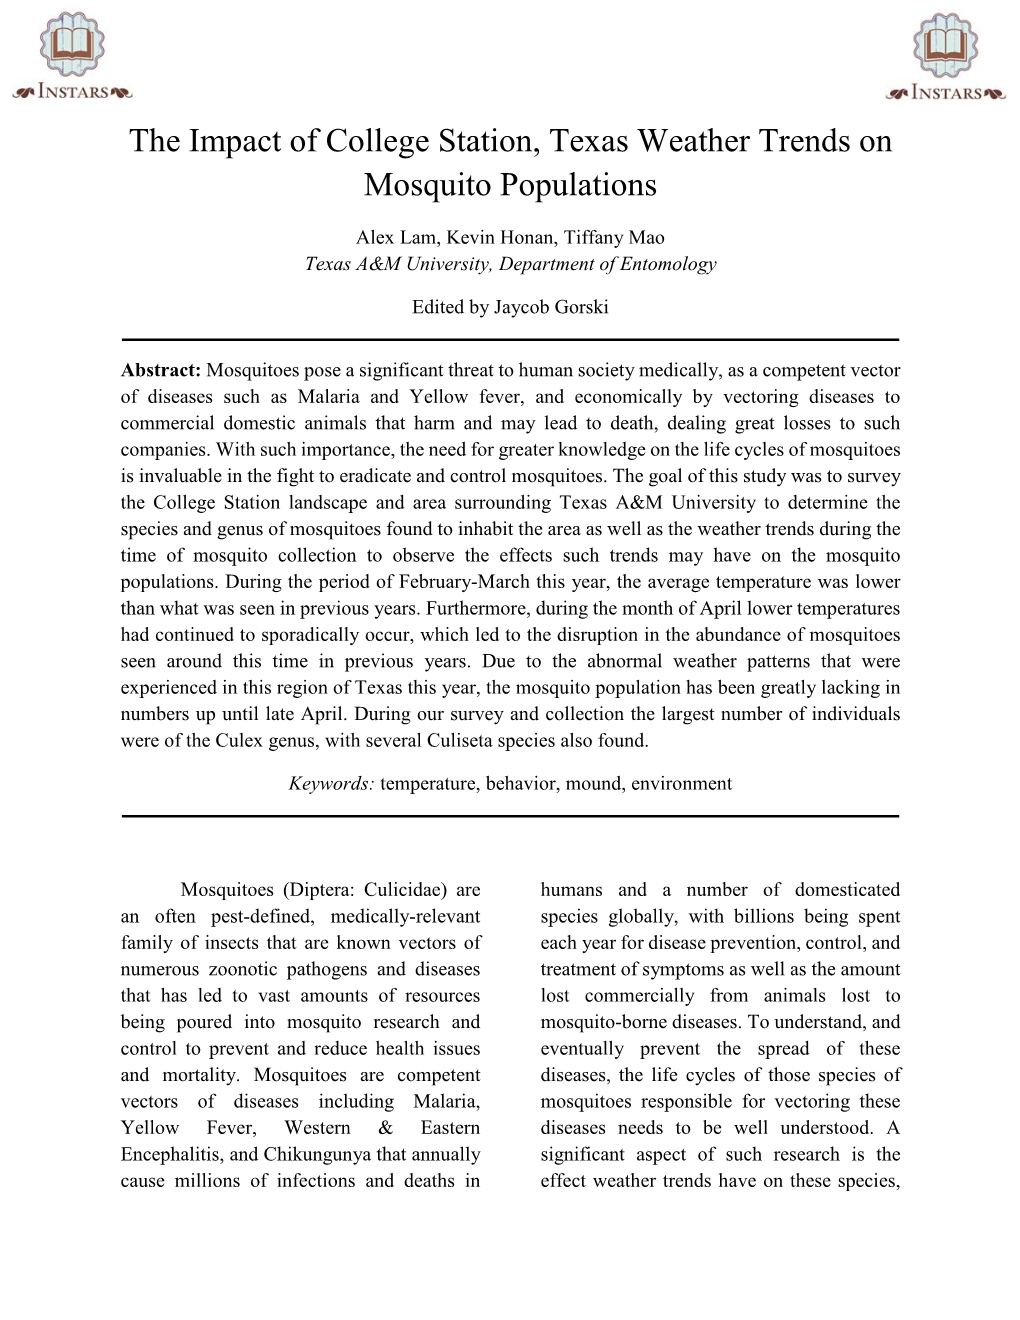 The Impact of College Station, Texas Weather Trends on Mosquito Populations